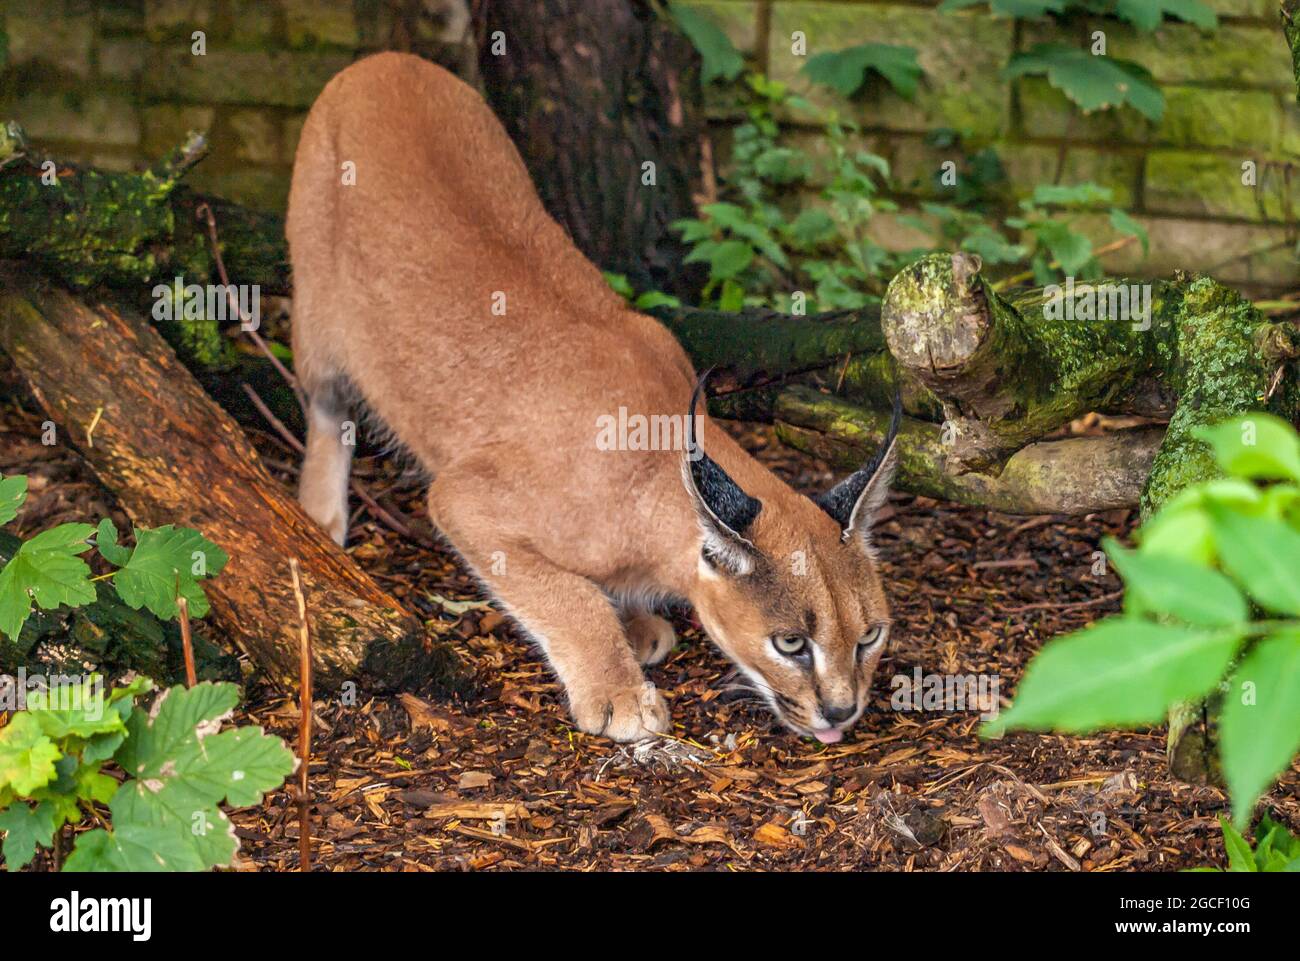 The caracal (Caracal caracal) is a medium-sized wild cat native to Africa, the Middle East, Central Asia and India. Stock Photo